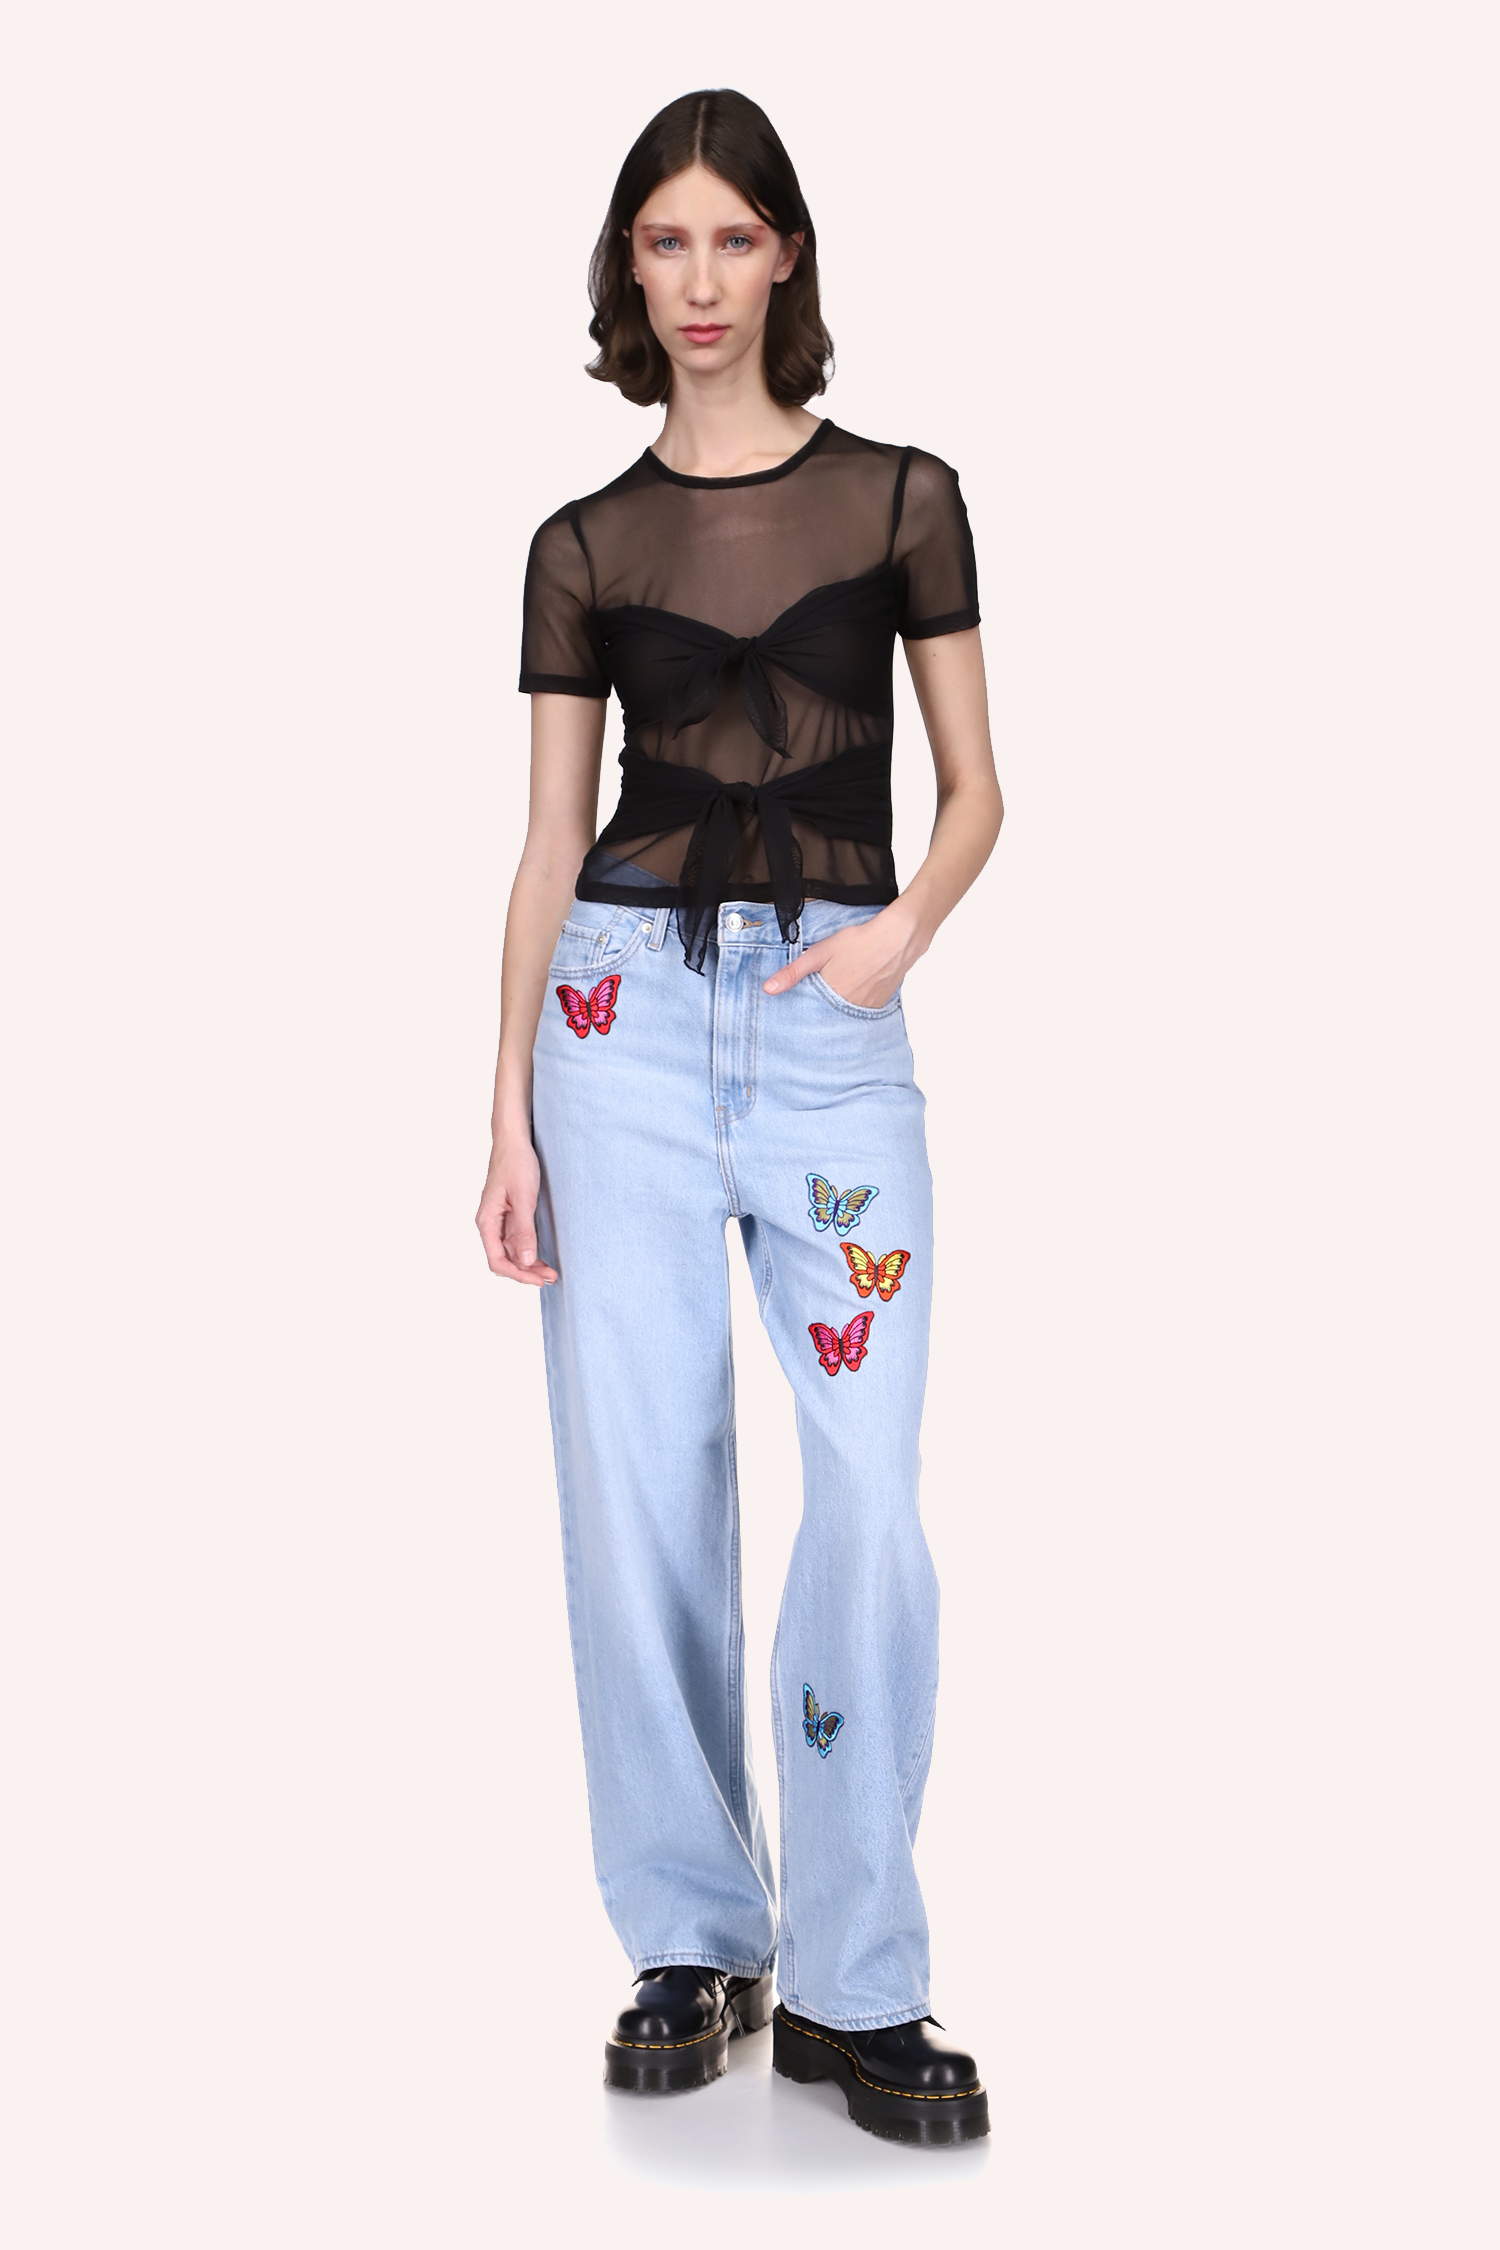 The Jenny Top Black is a great asset with a blue jeans